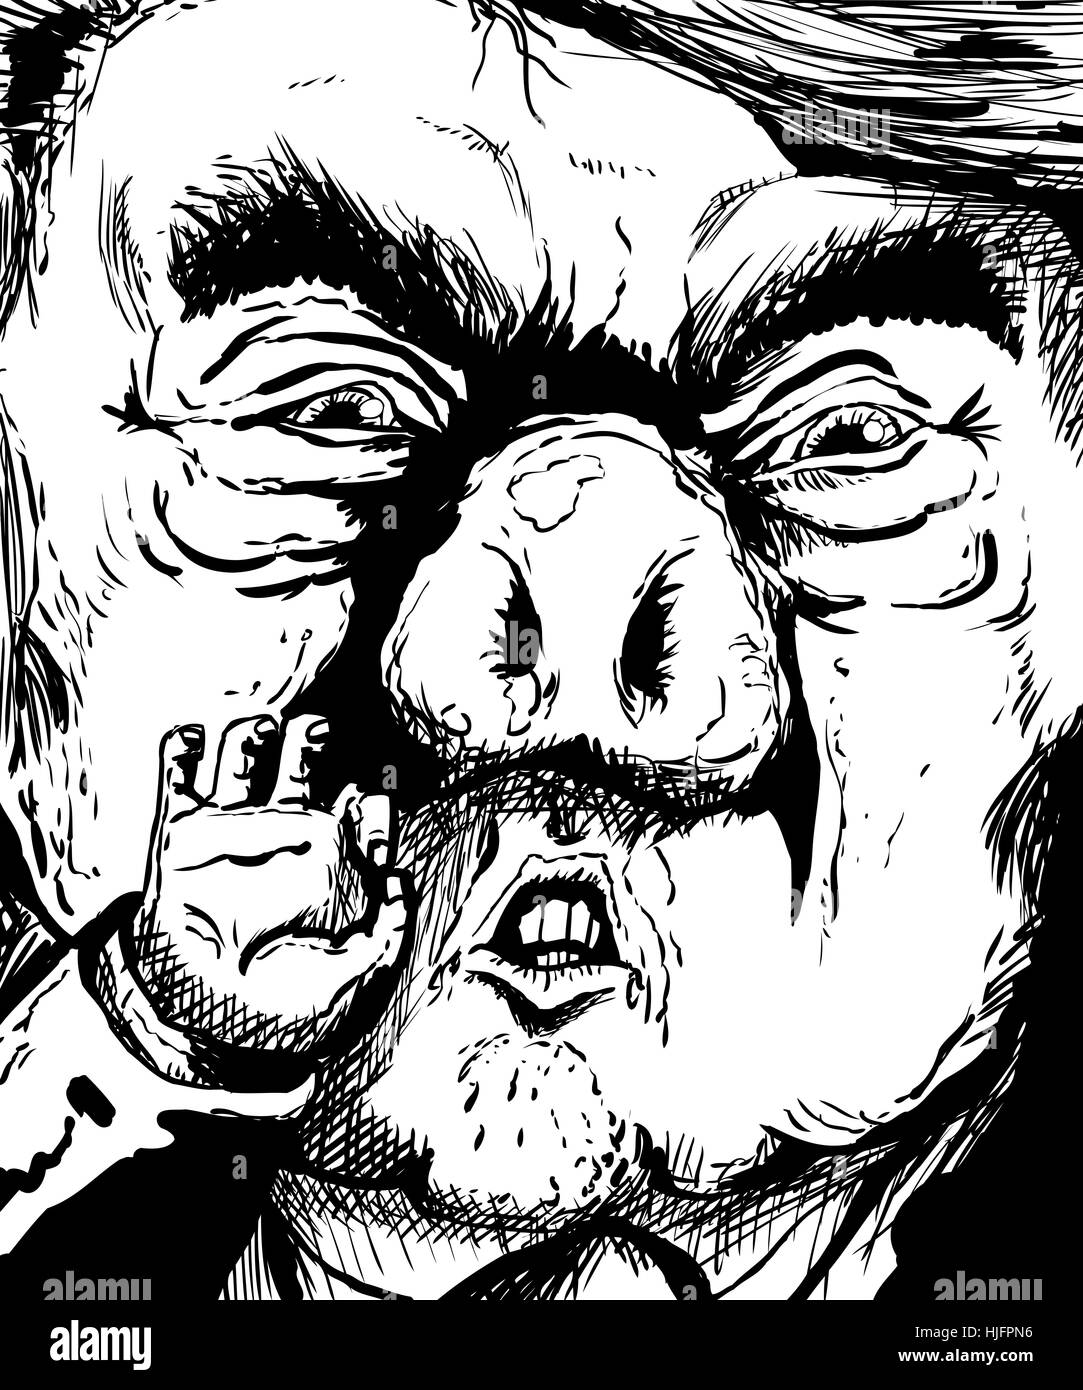 January 23, 2017. Outlined caricature of Donald Trump with dirty hog shaped nose Stock Photo